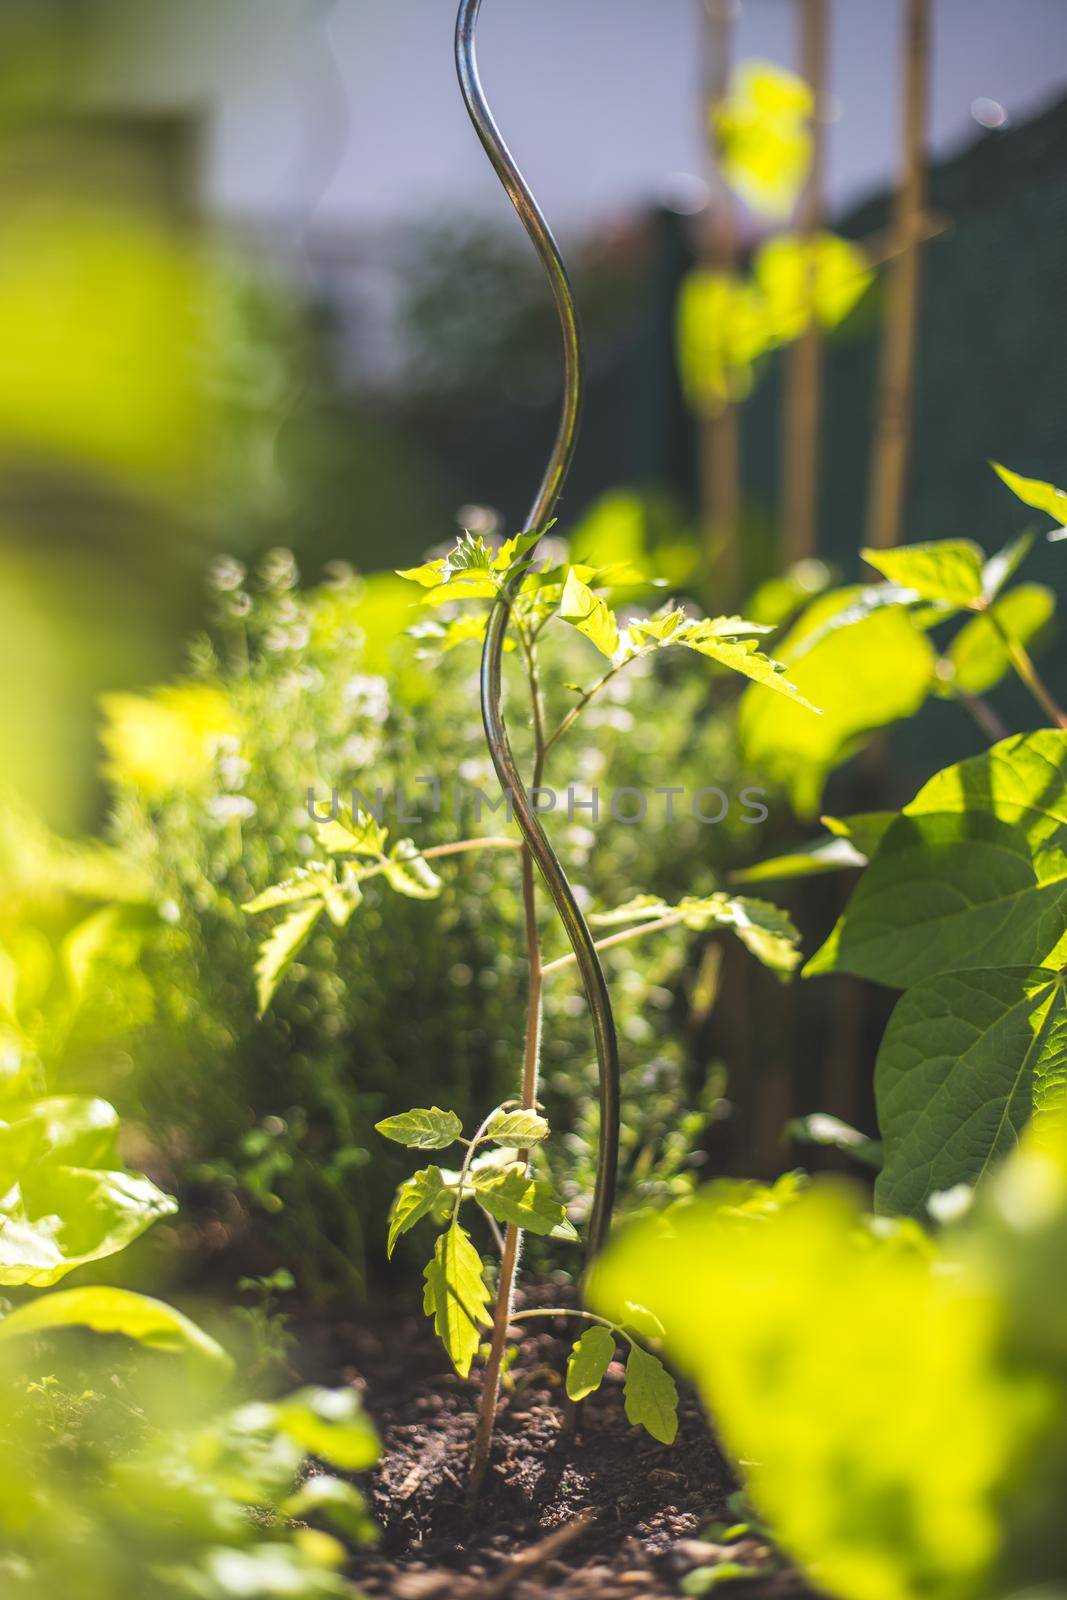 Young tomato plant is growing in a raised bed in the sunlight